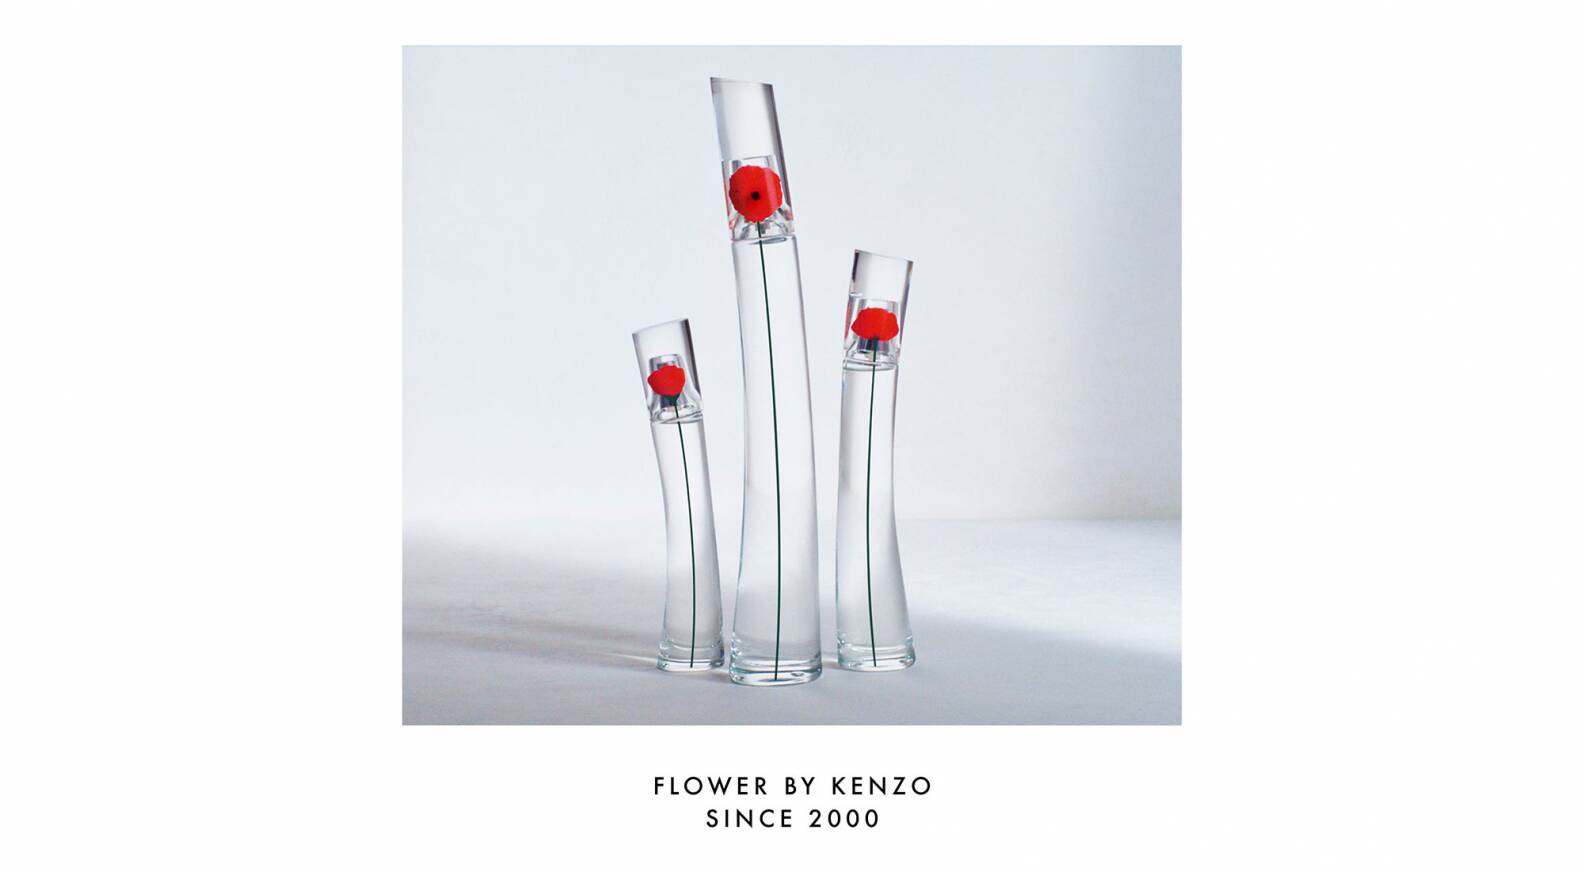 The iconic Flower its Kenzo anniversary! 20th LVMH celebrates - By